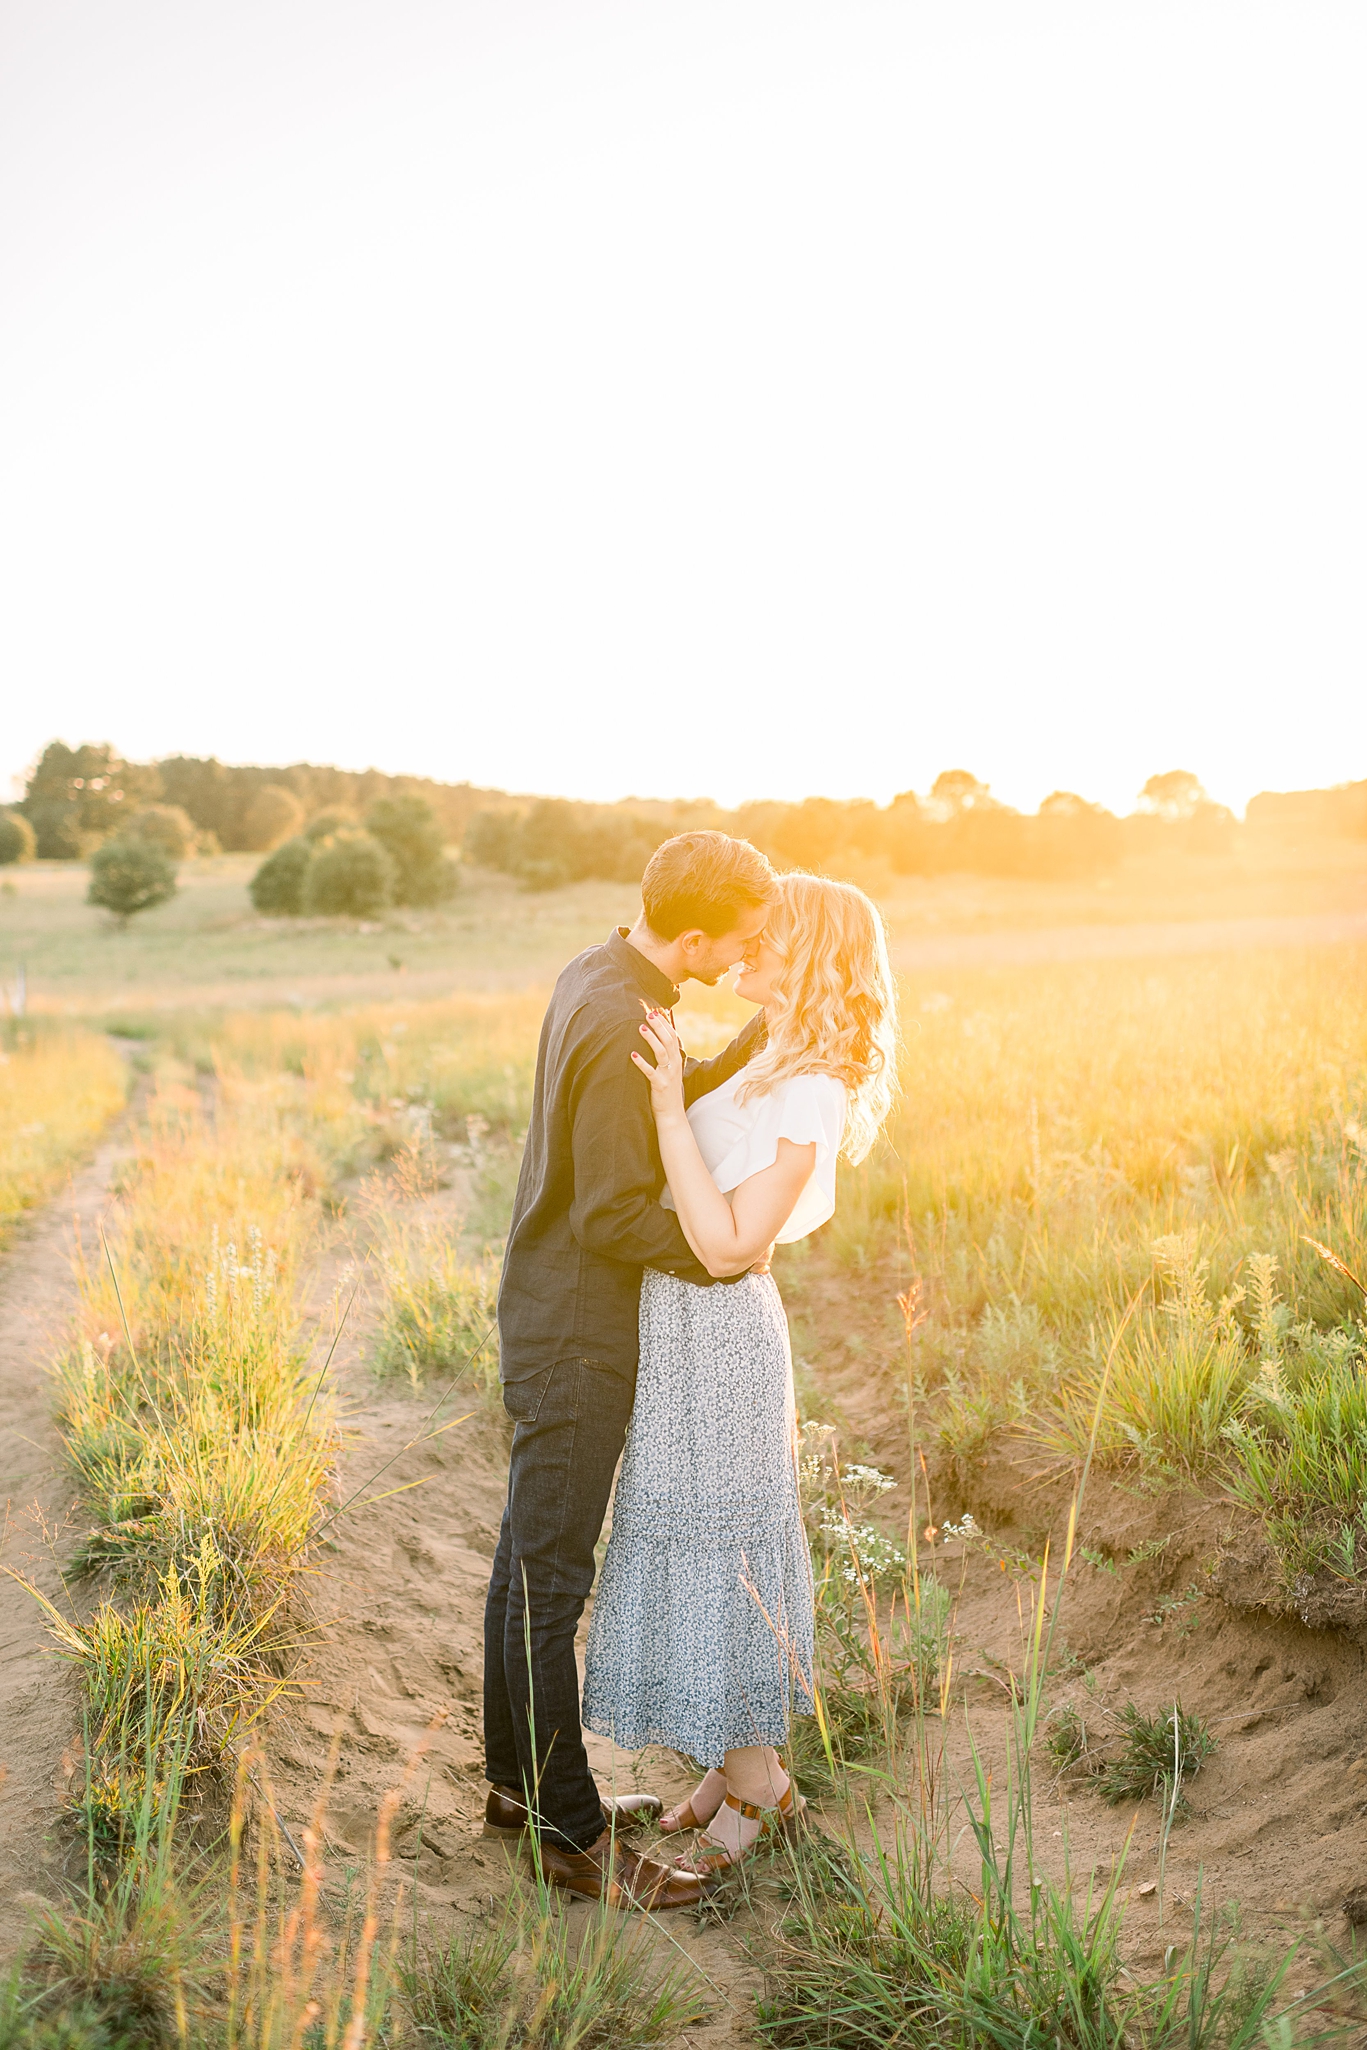 Spring Green, WI Engagement Photographers - Larissa Marie Photography